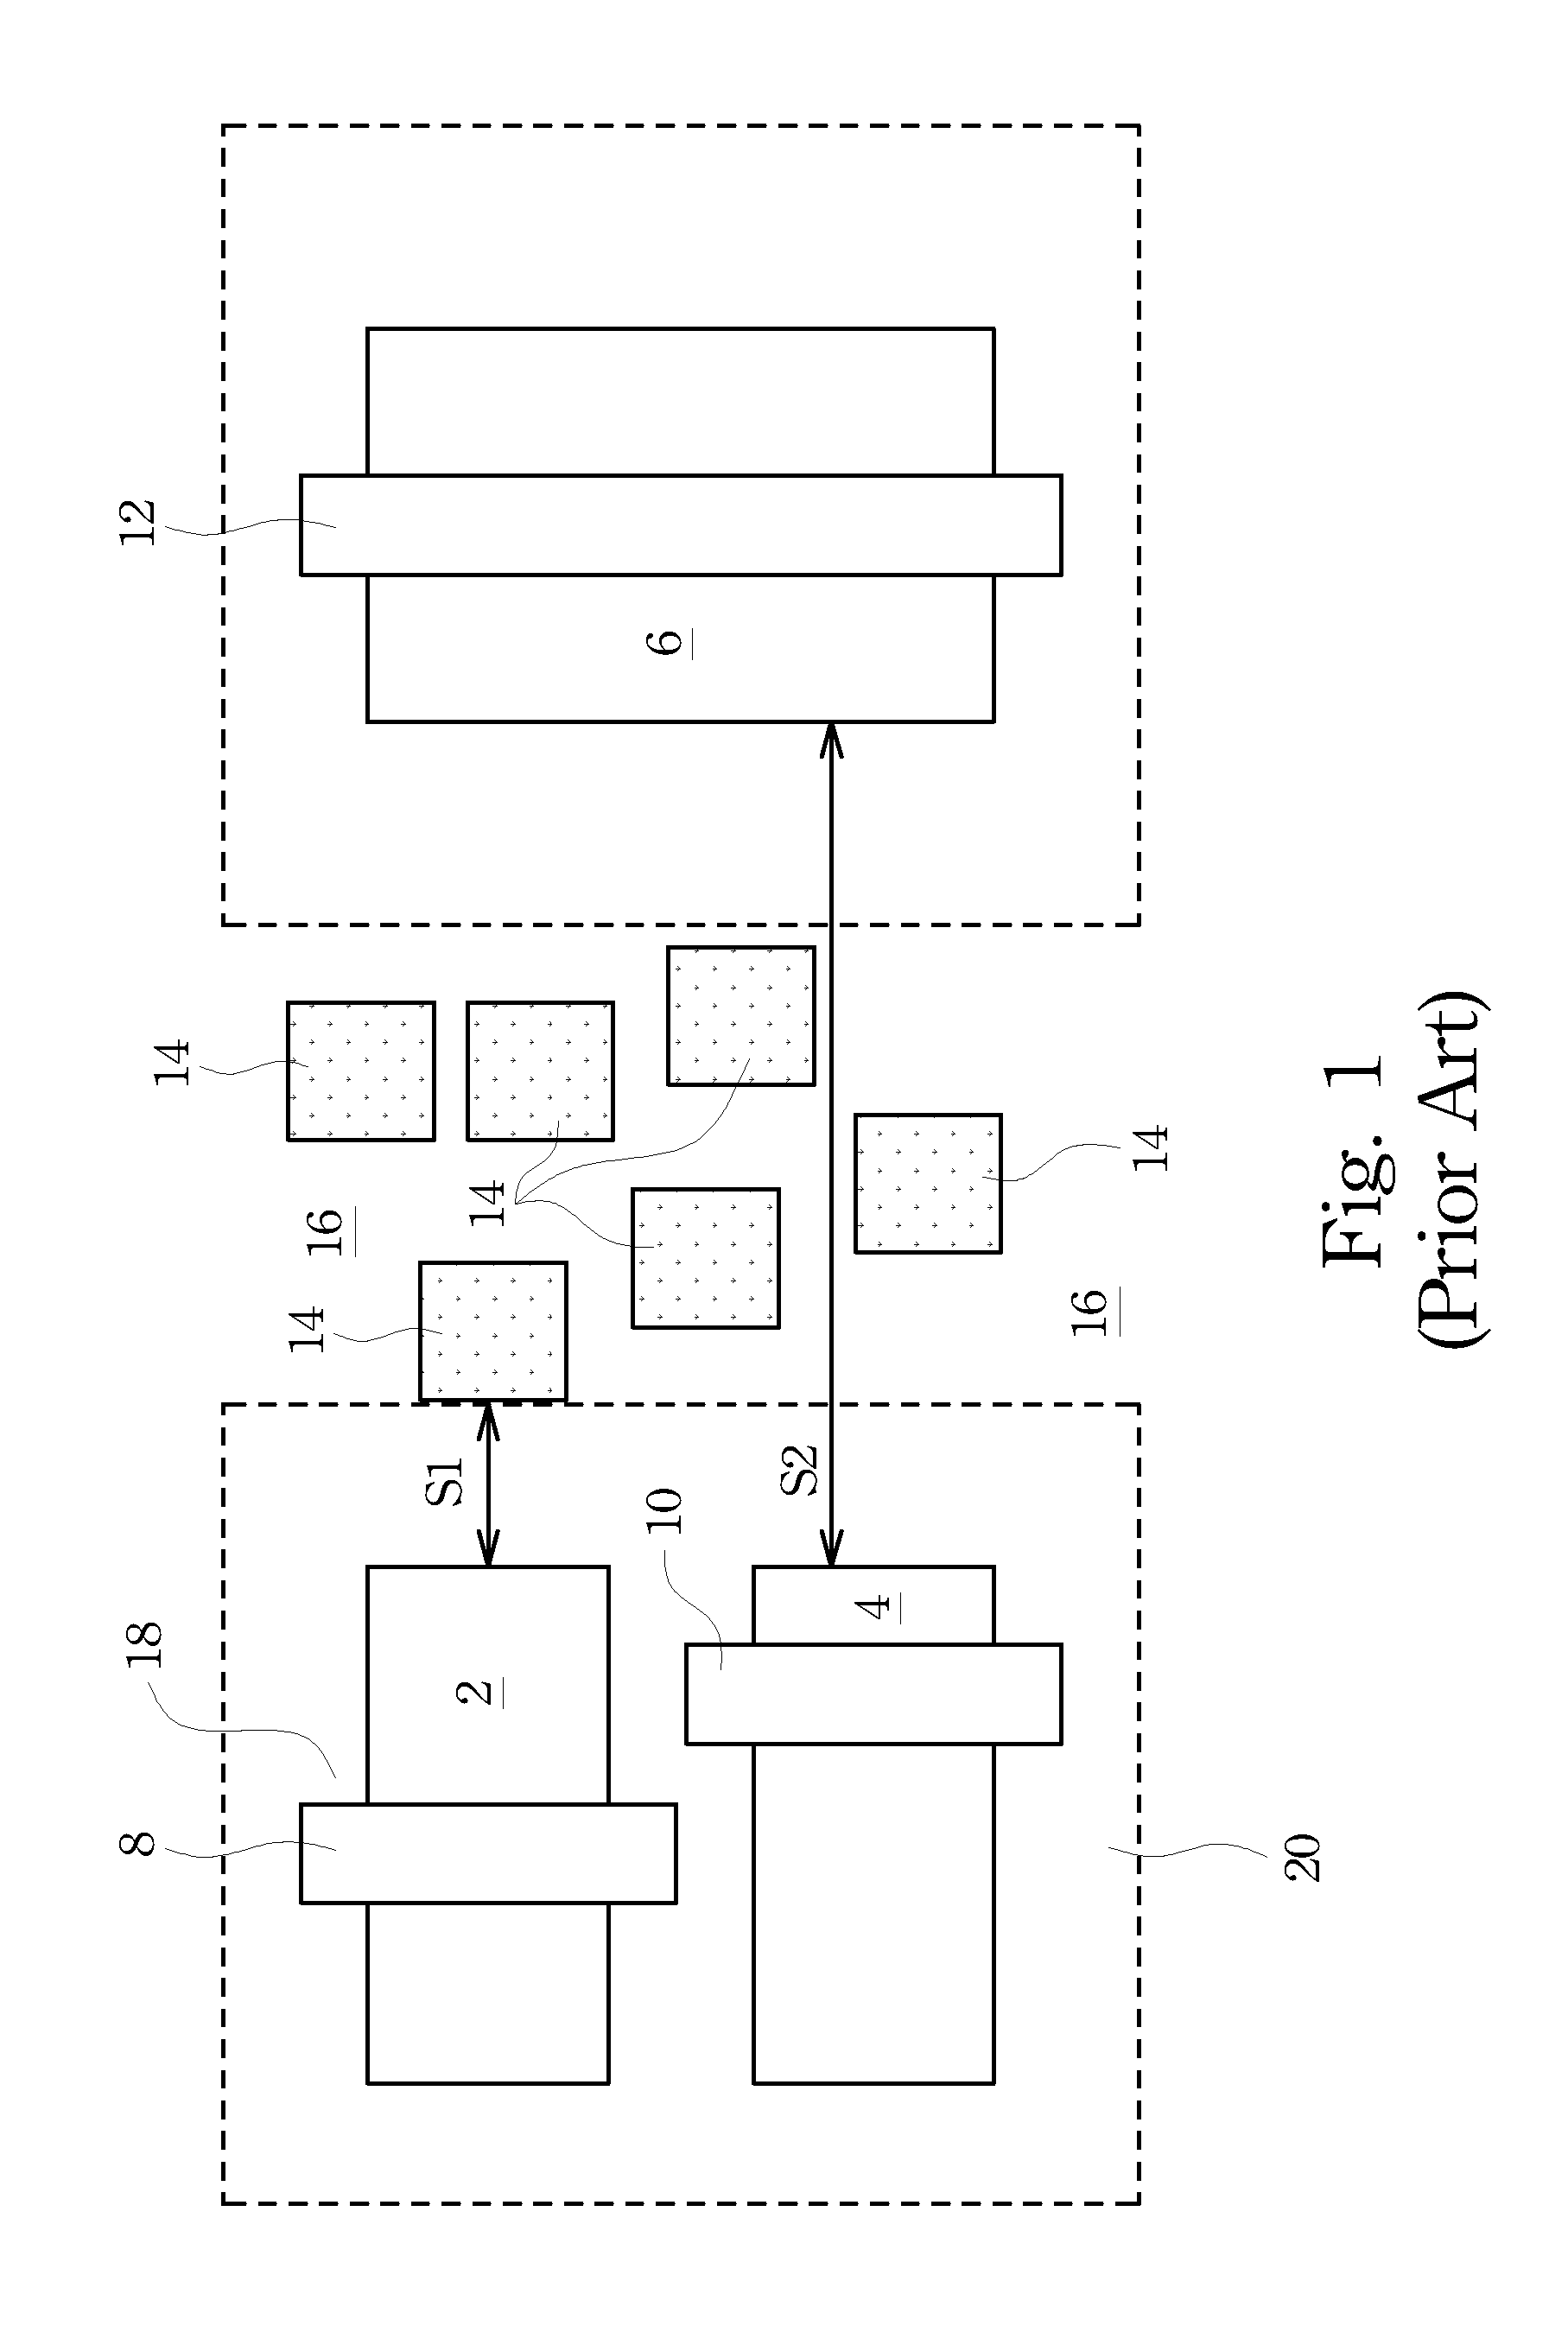 Dummy pattern design for reducing device performance drift